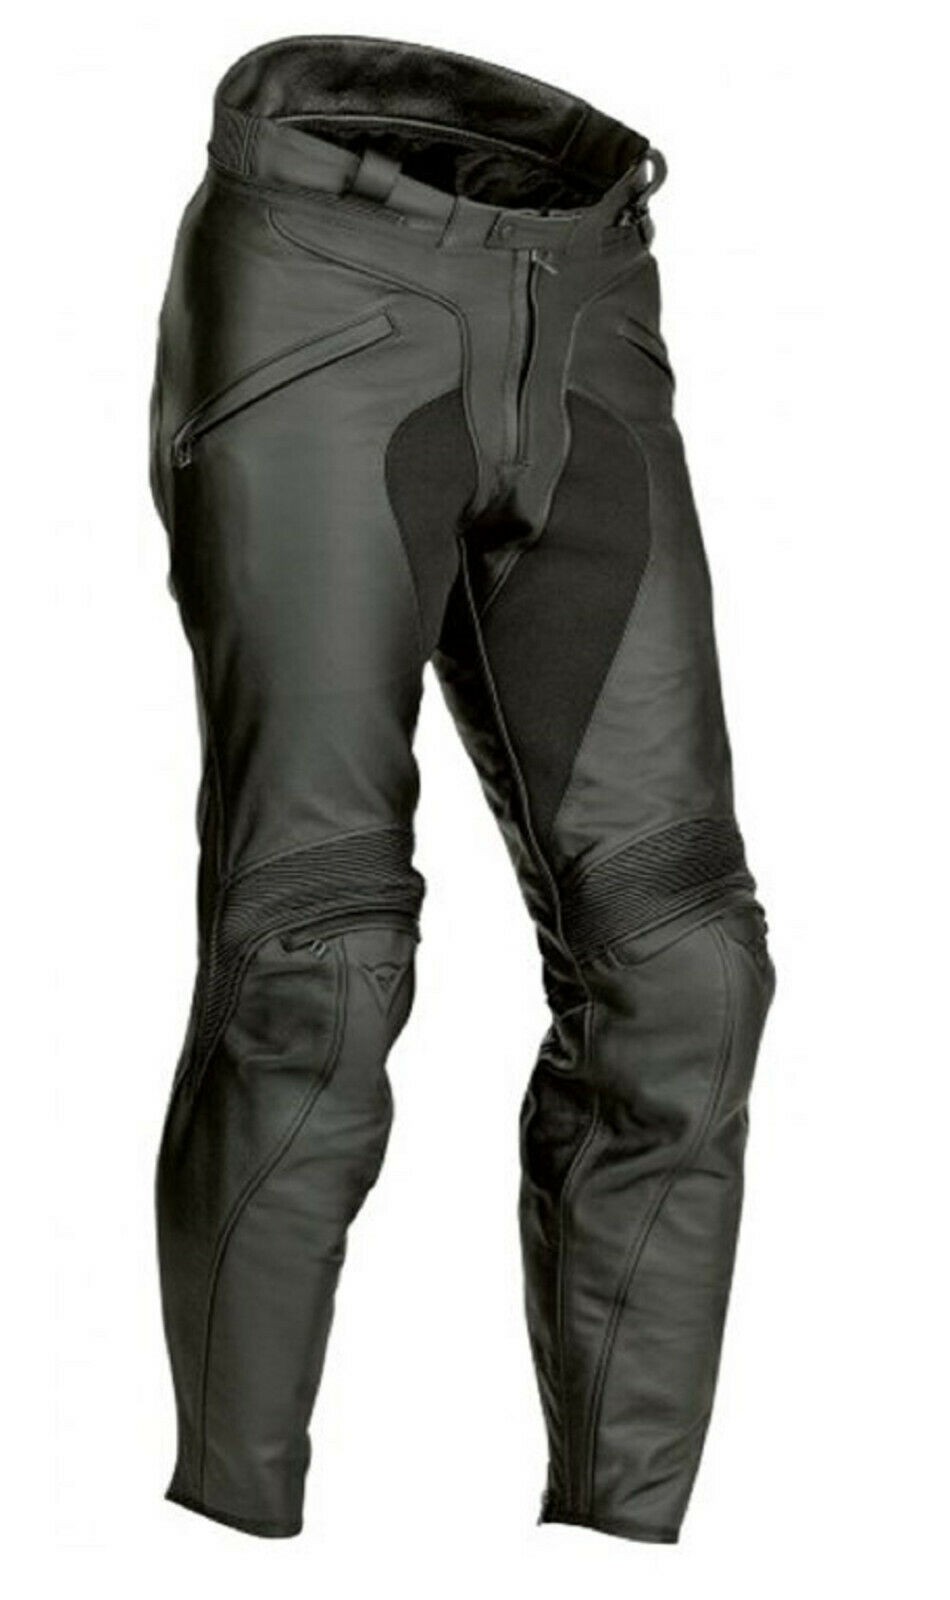 Moto trousers Leather Dainese Model Alien Black For Sale Online   Outletmotoeu